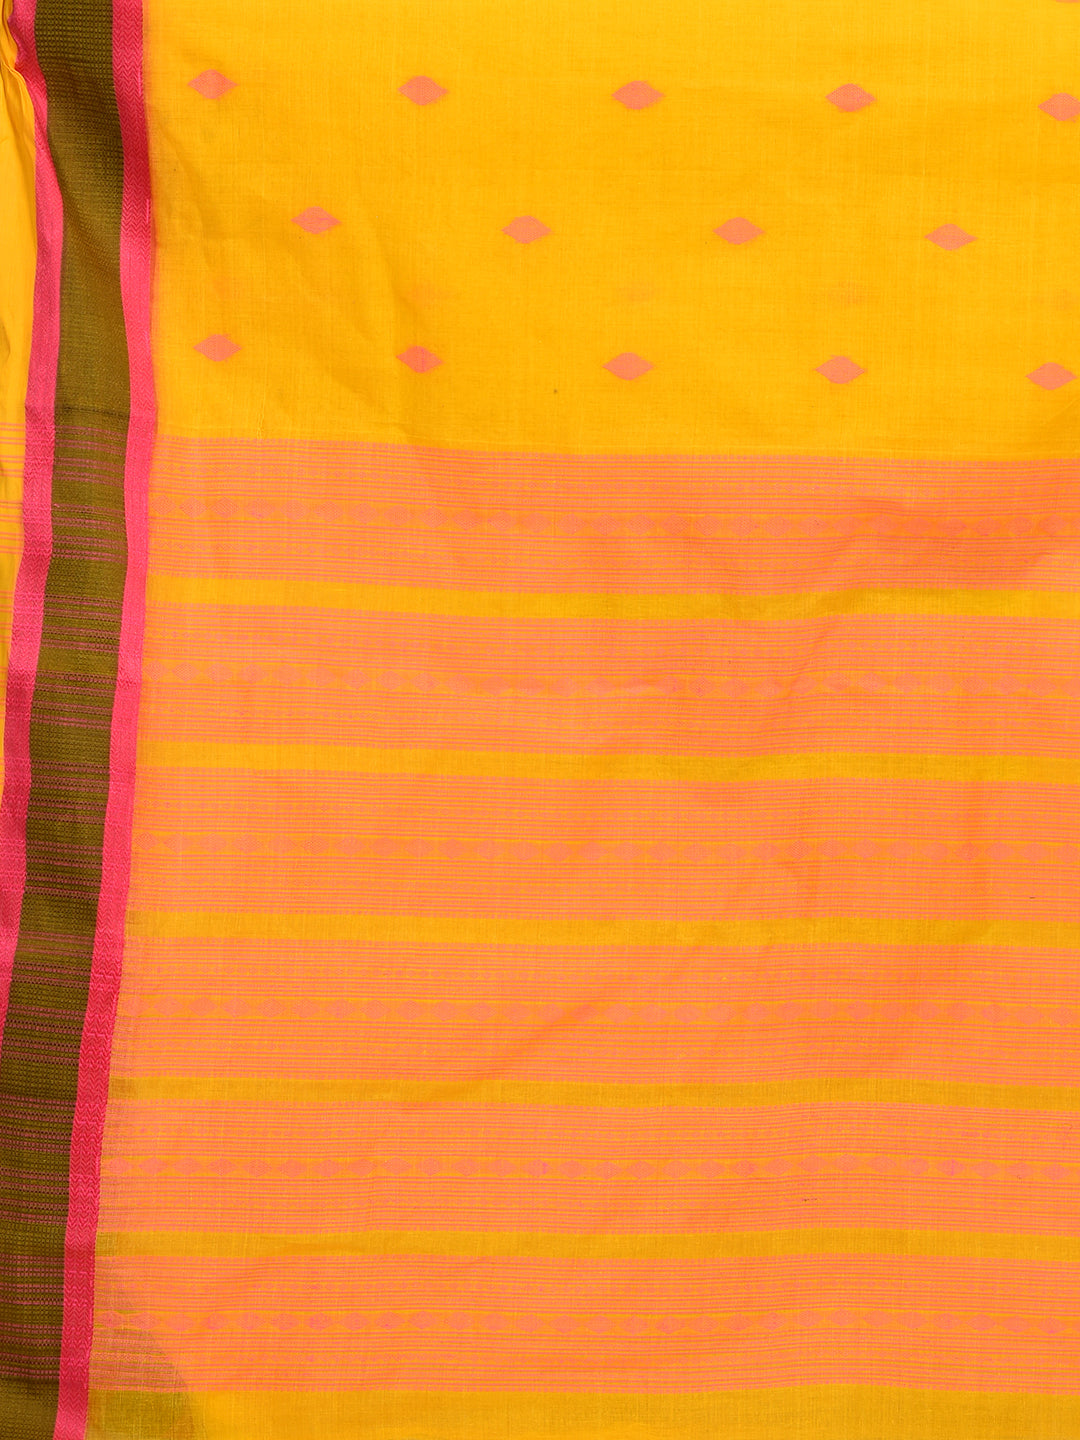 Women's Yellow Pure Cotton Hand woven Tangail Saree without blouse fabric. - Sajasajo